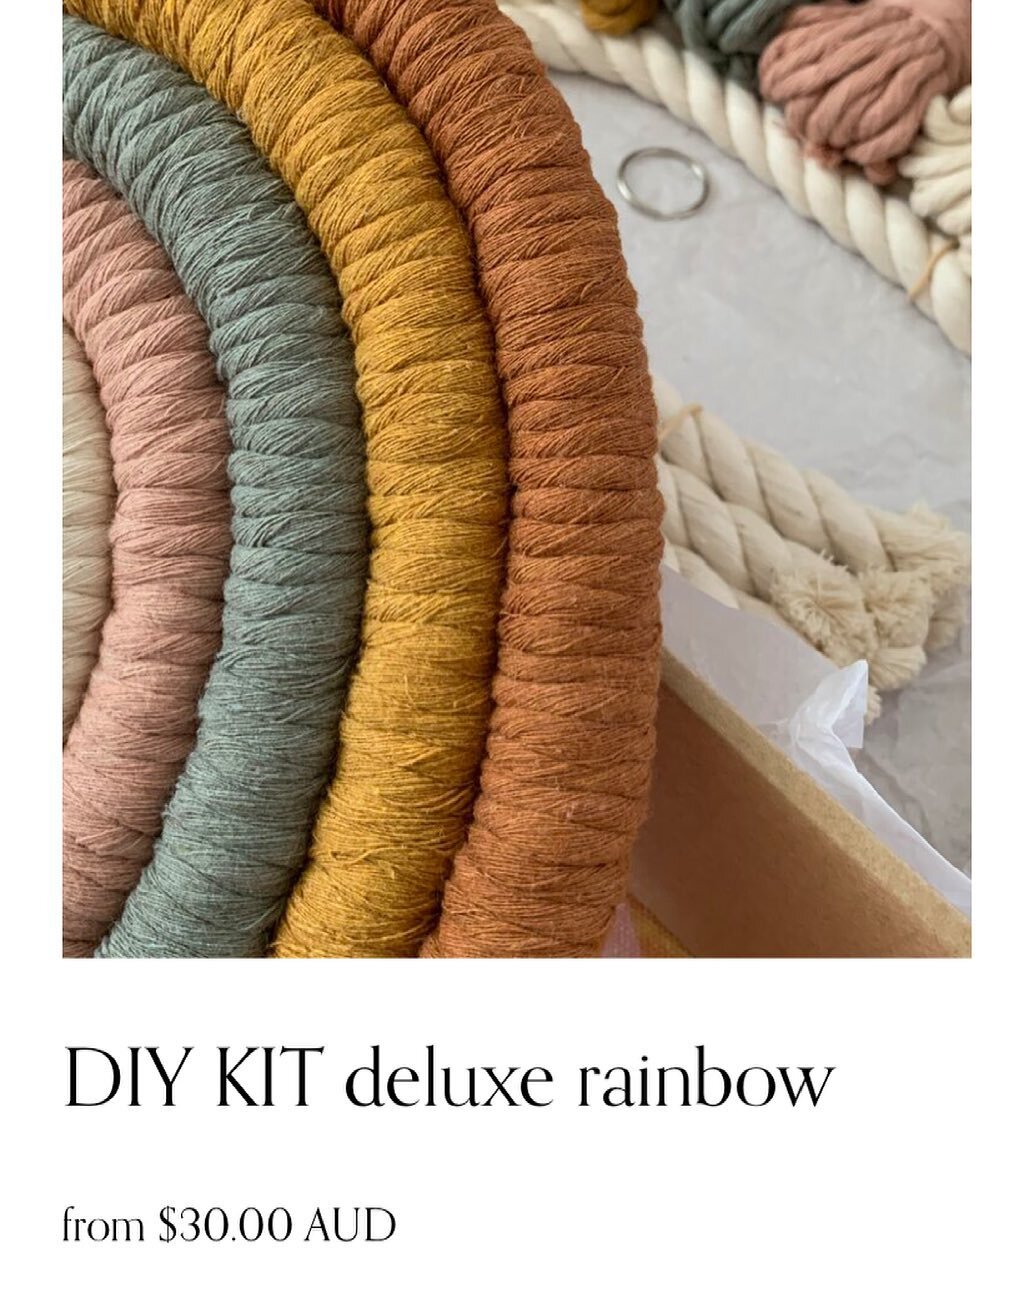 ✨CUSTOM DIY KITS✨
.
You can now customise our DIY KITS to pick your fav colour combo! Choose from our wide range of colours to make the perfect rainbow for you! 🙌🏼
.
@zo.knot  #zoknot #macrame #macramerainbow #macramerainbows #macramerainbowwallhan